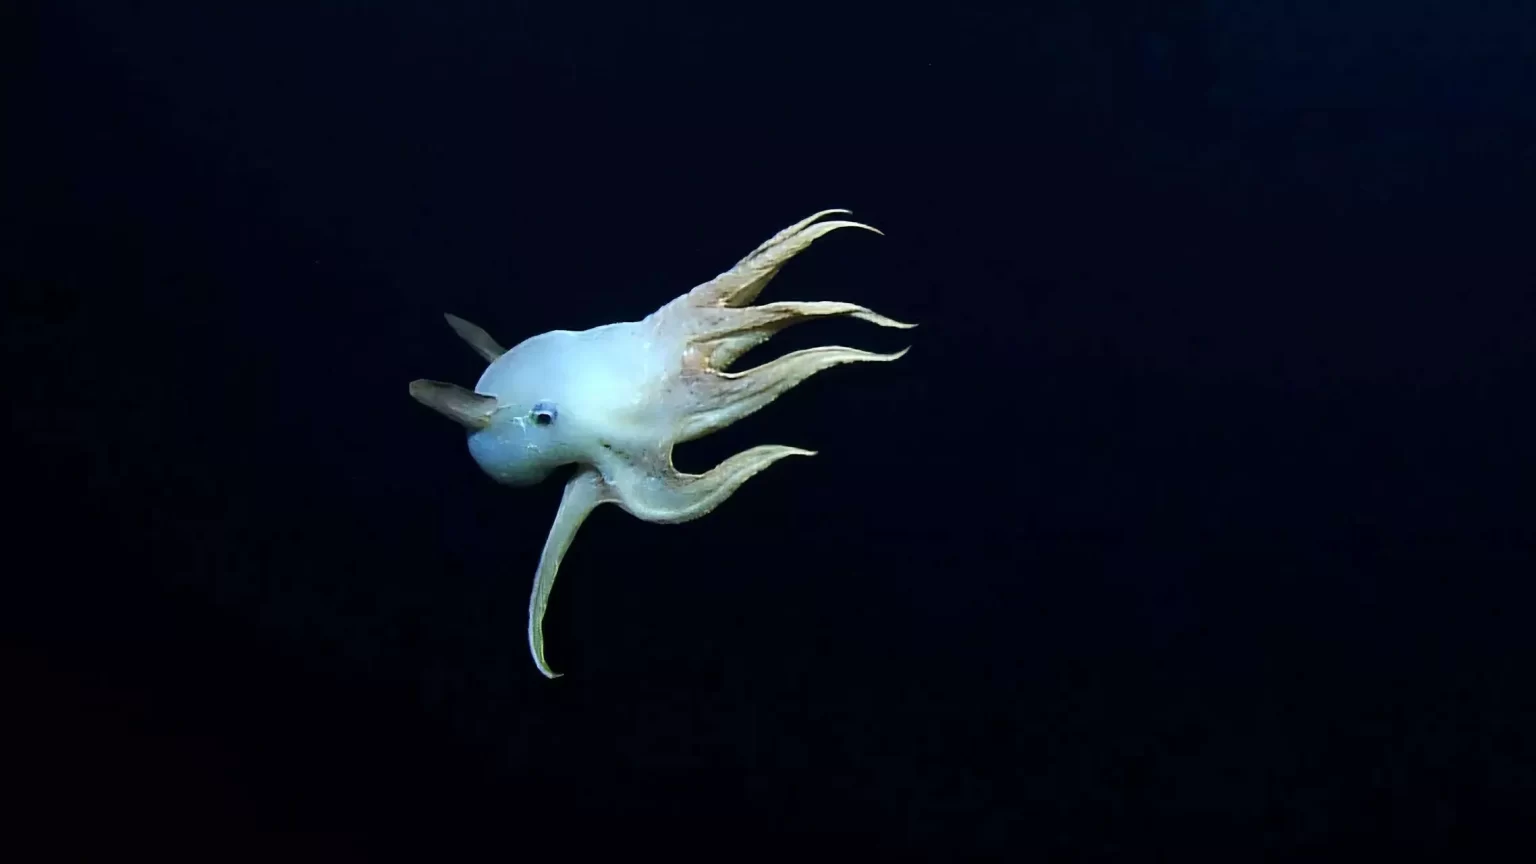 a ghostly dumbo octopus is pictu